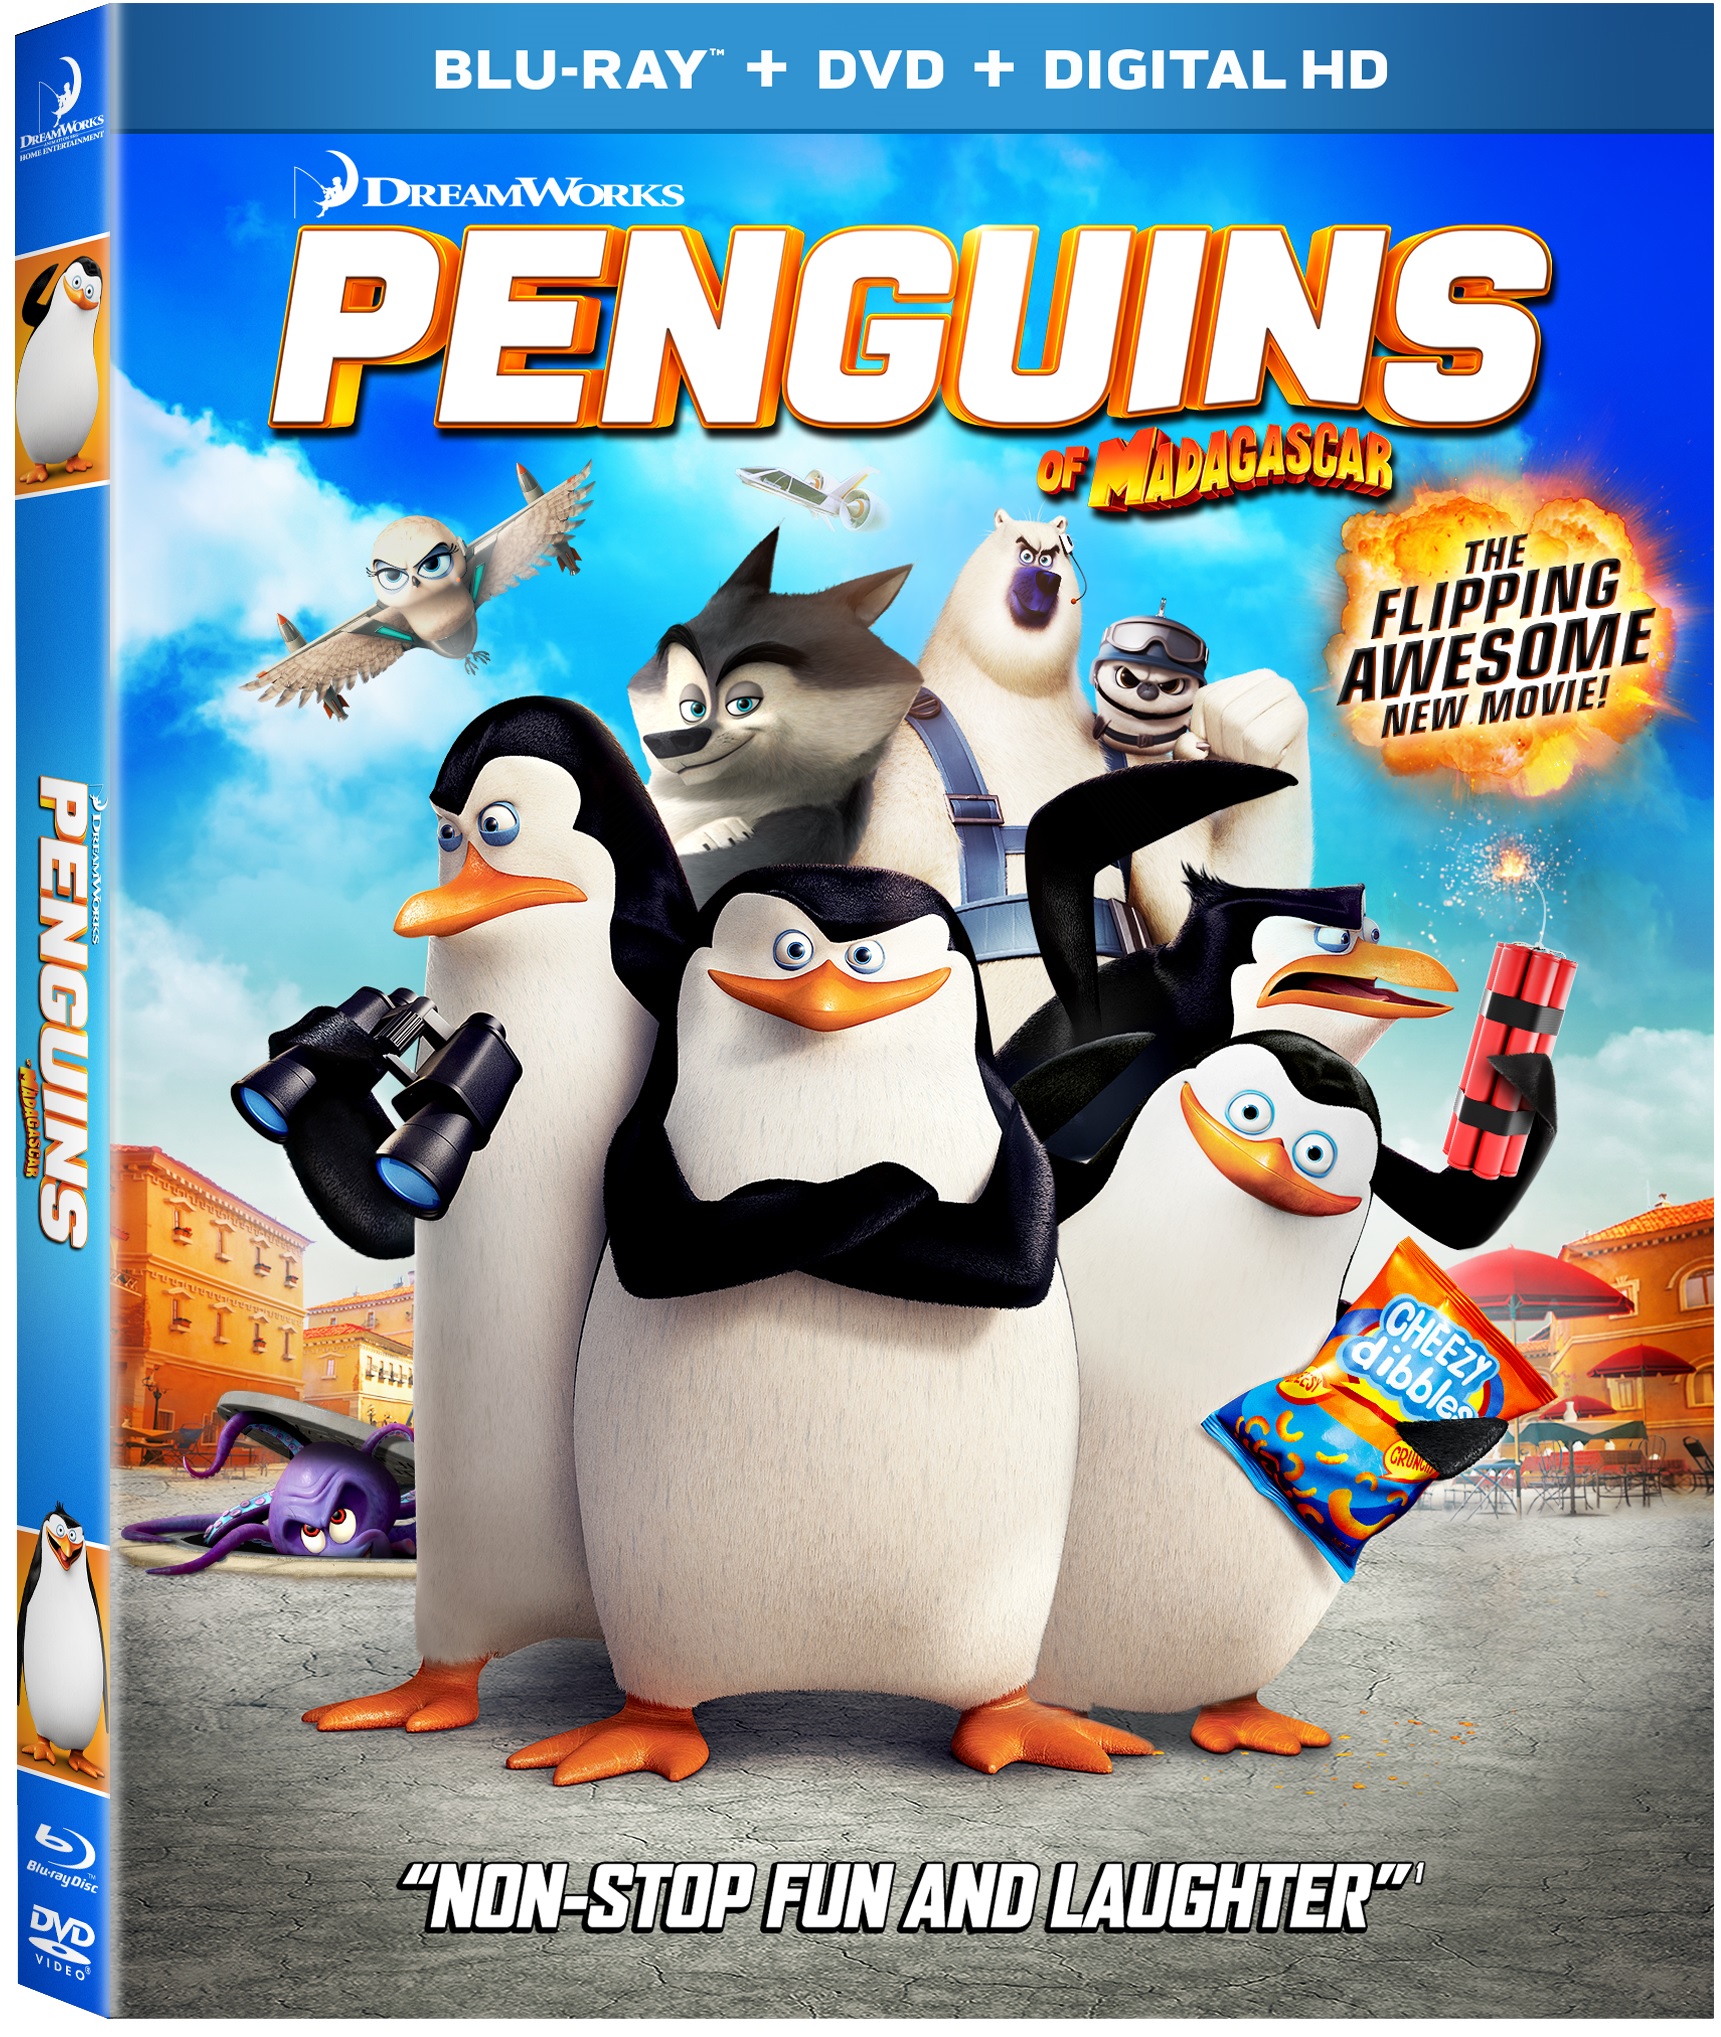 The Penguins of Madagascar Blu-ray Review